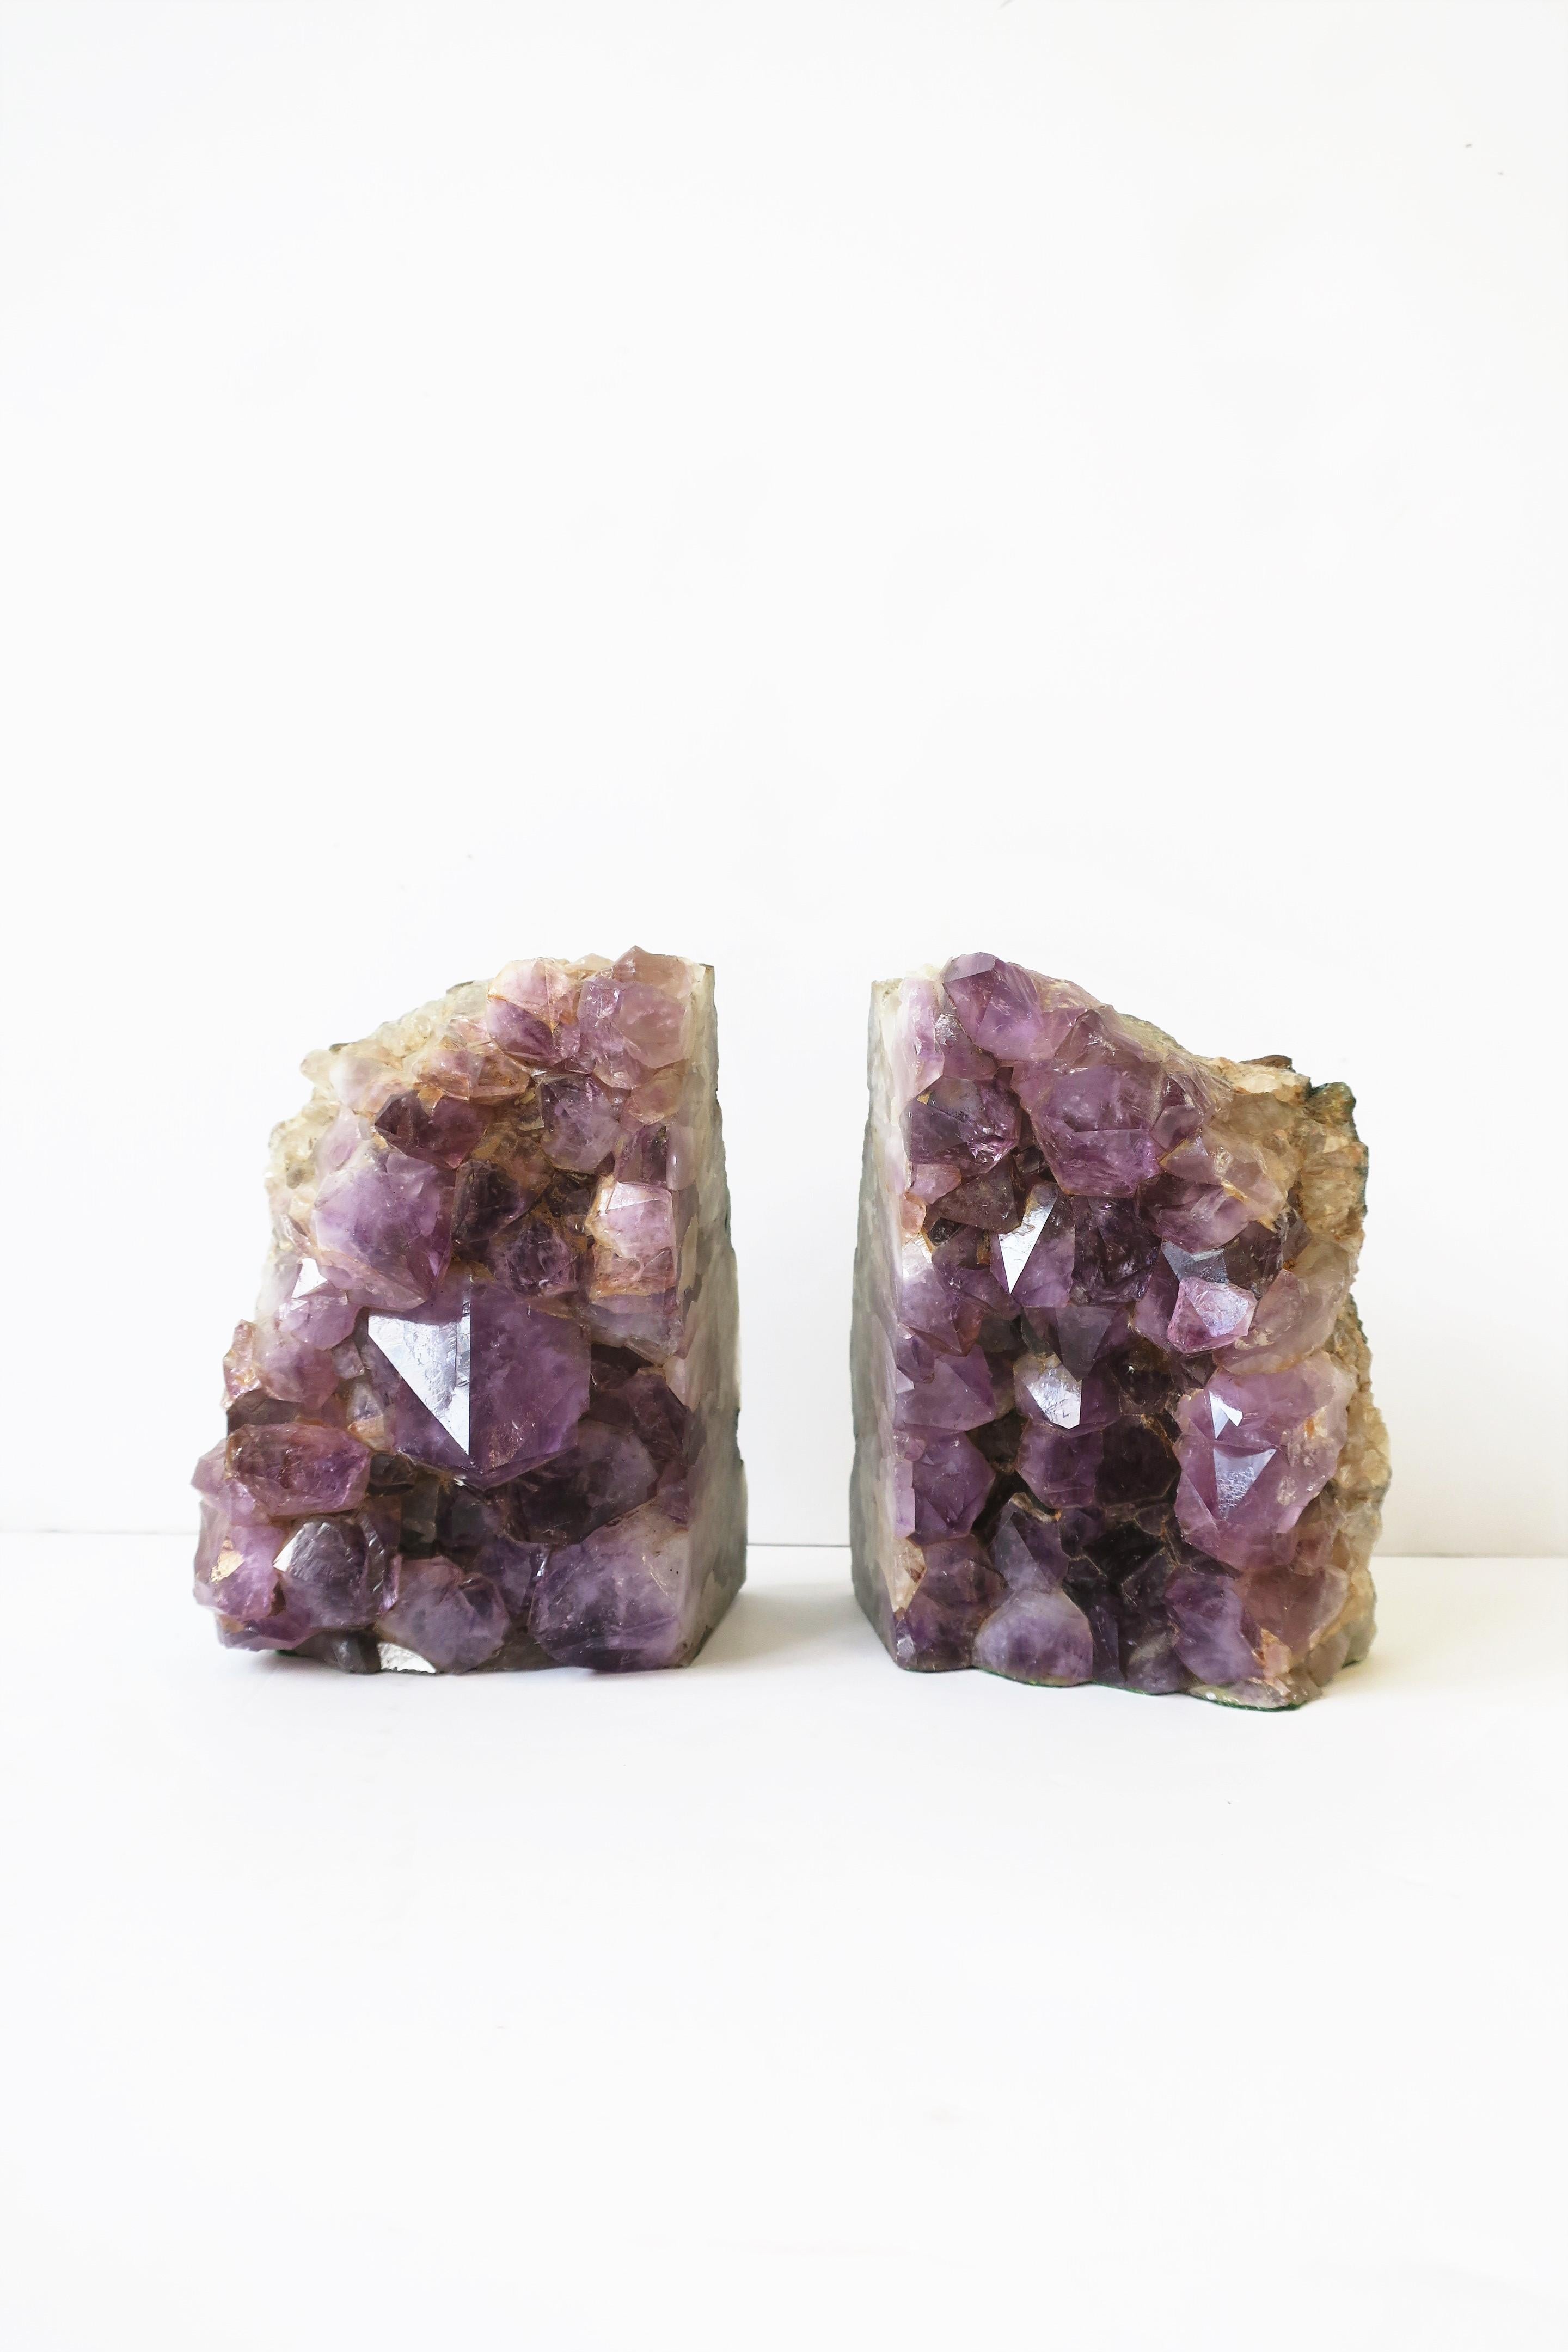 A beautiful and substantial pair of natural purple amethyst specimen bookends or sculptures/decorative objects, circa 20th century. Dimensions: 4